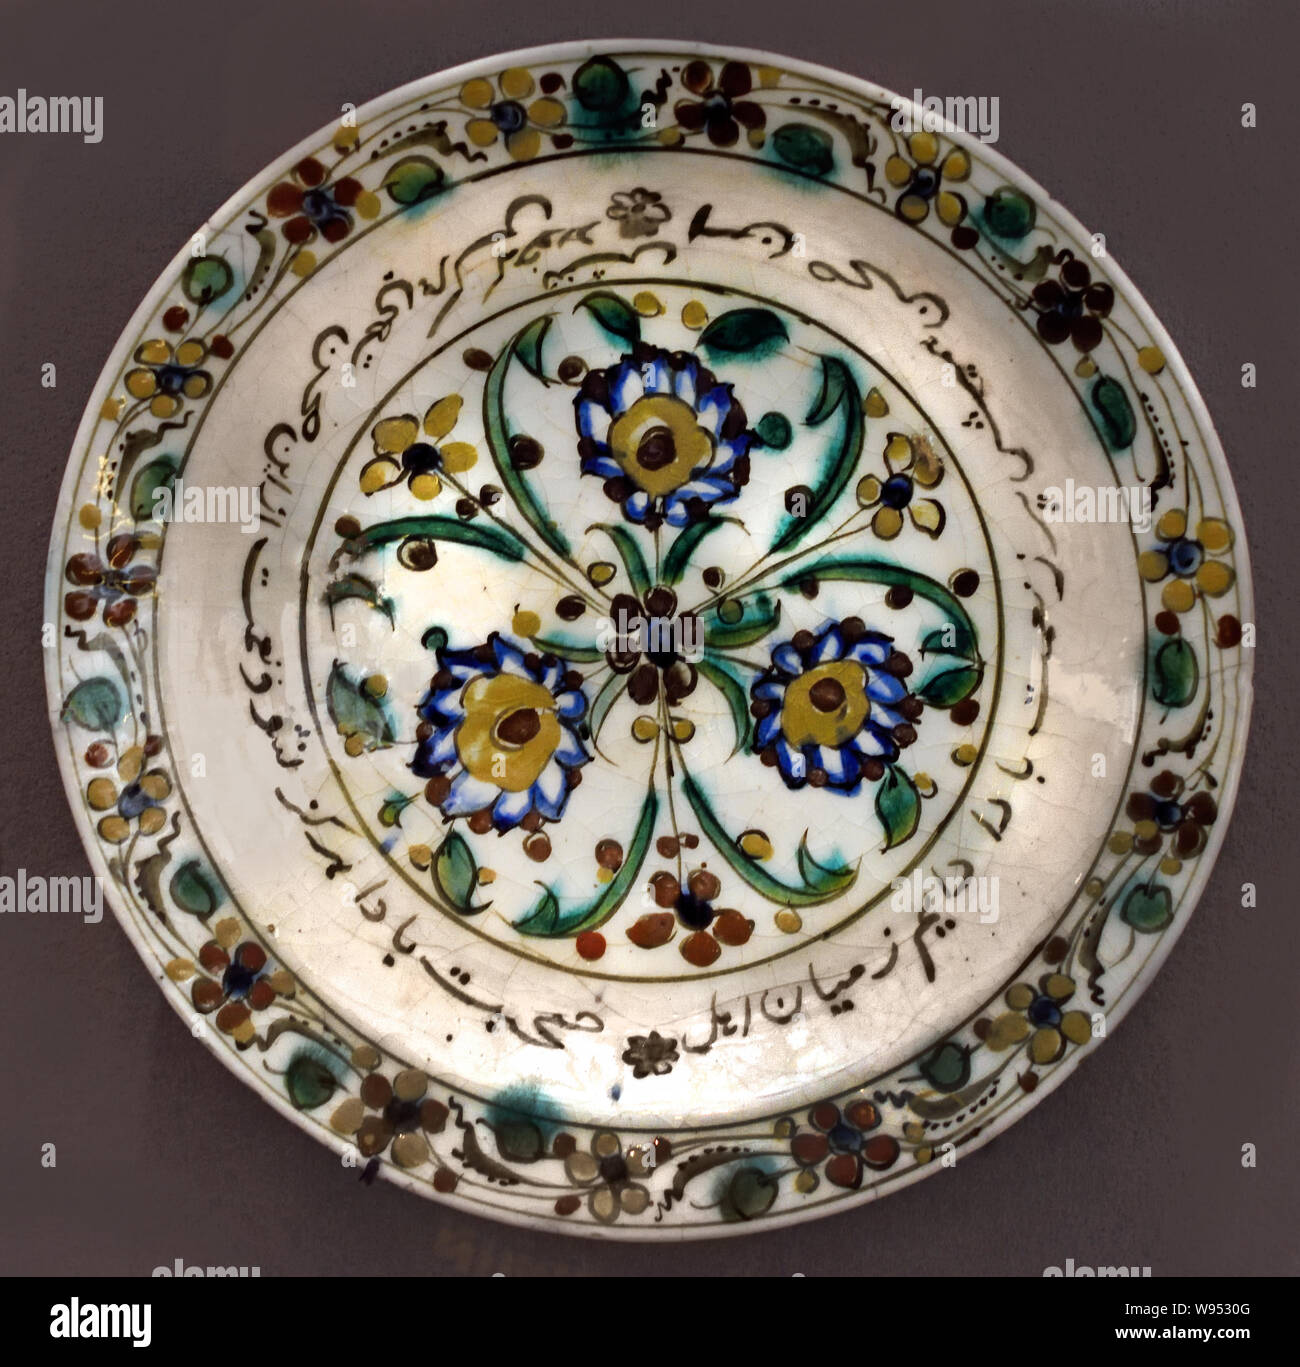 The inscription in Persian says: 'May this dish be always full, always surrounded by friends, that they never miss anything and that they feast well.  dish late 16th - early 17th century Iran, Ceramic, painted underglaze decoration. Stock Photo